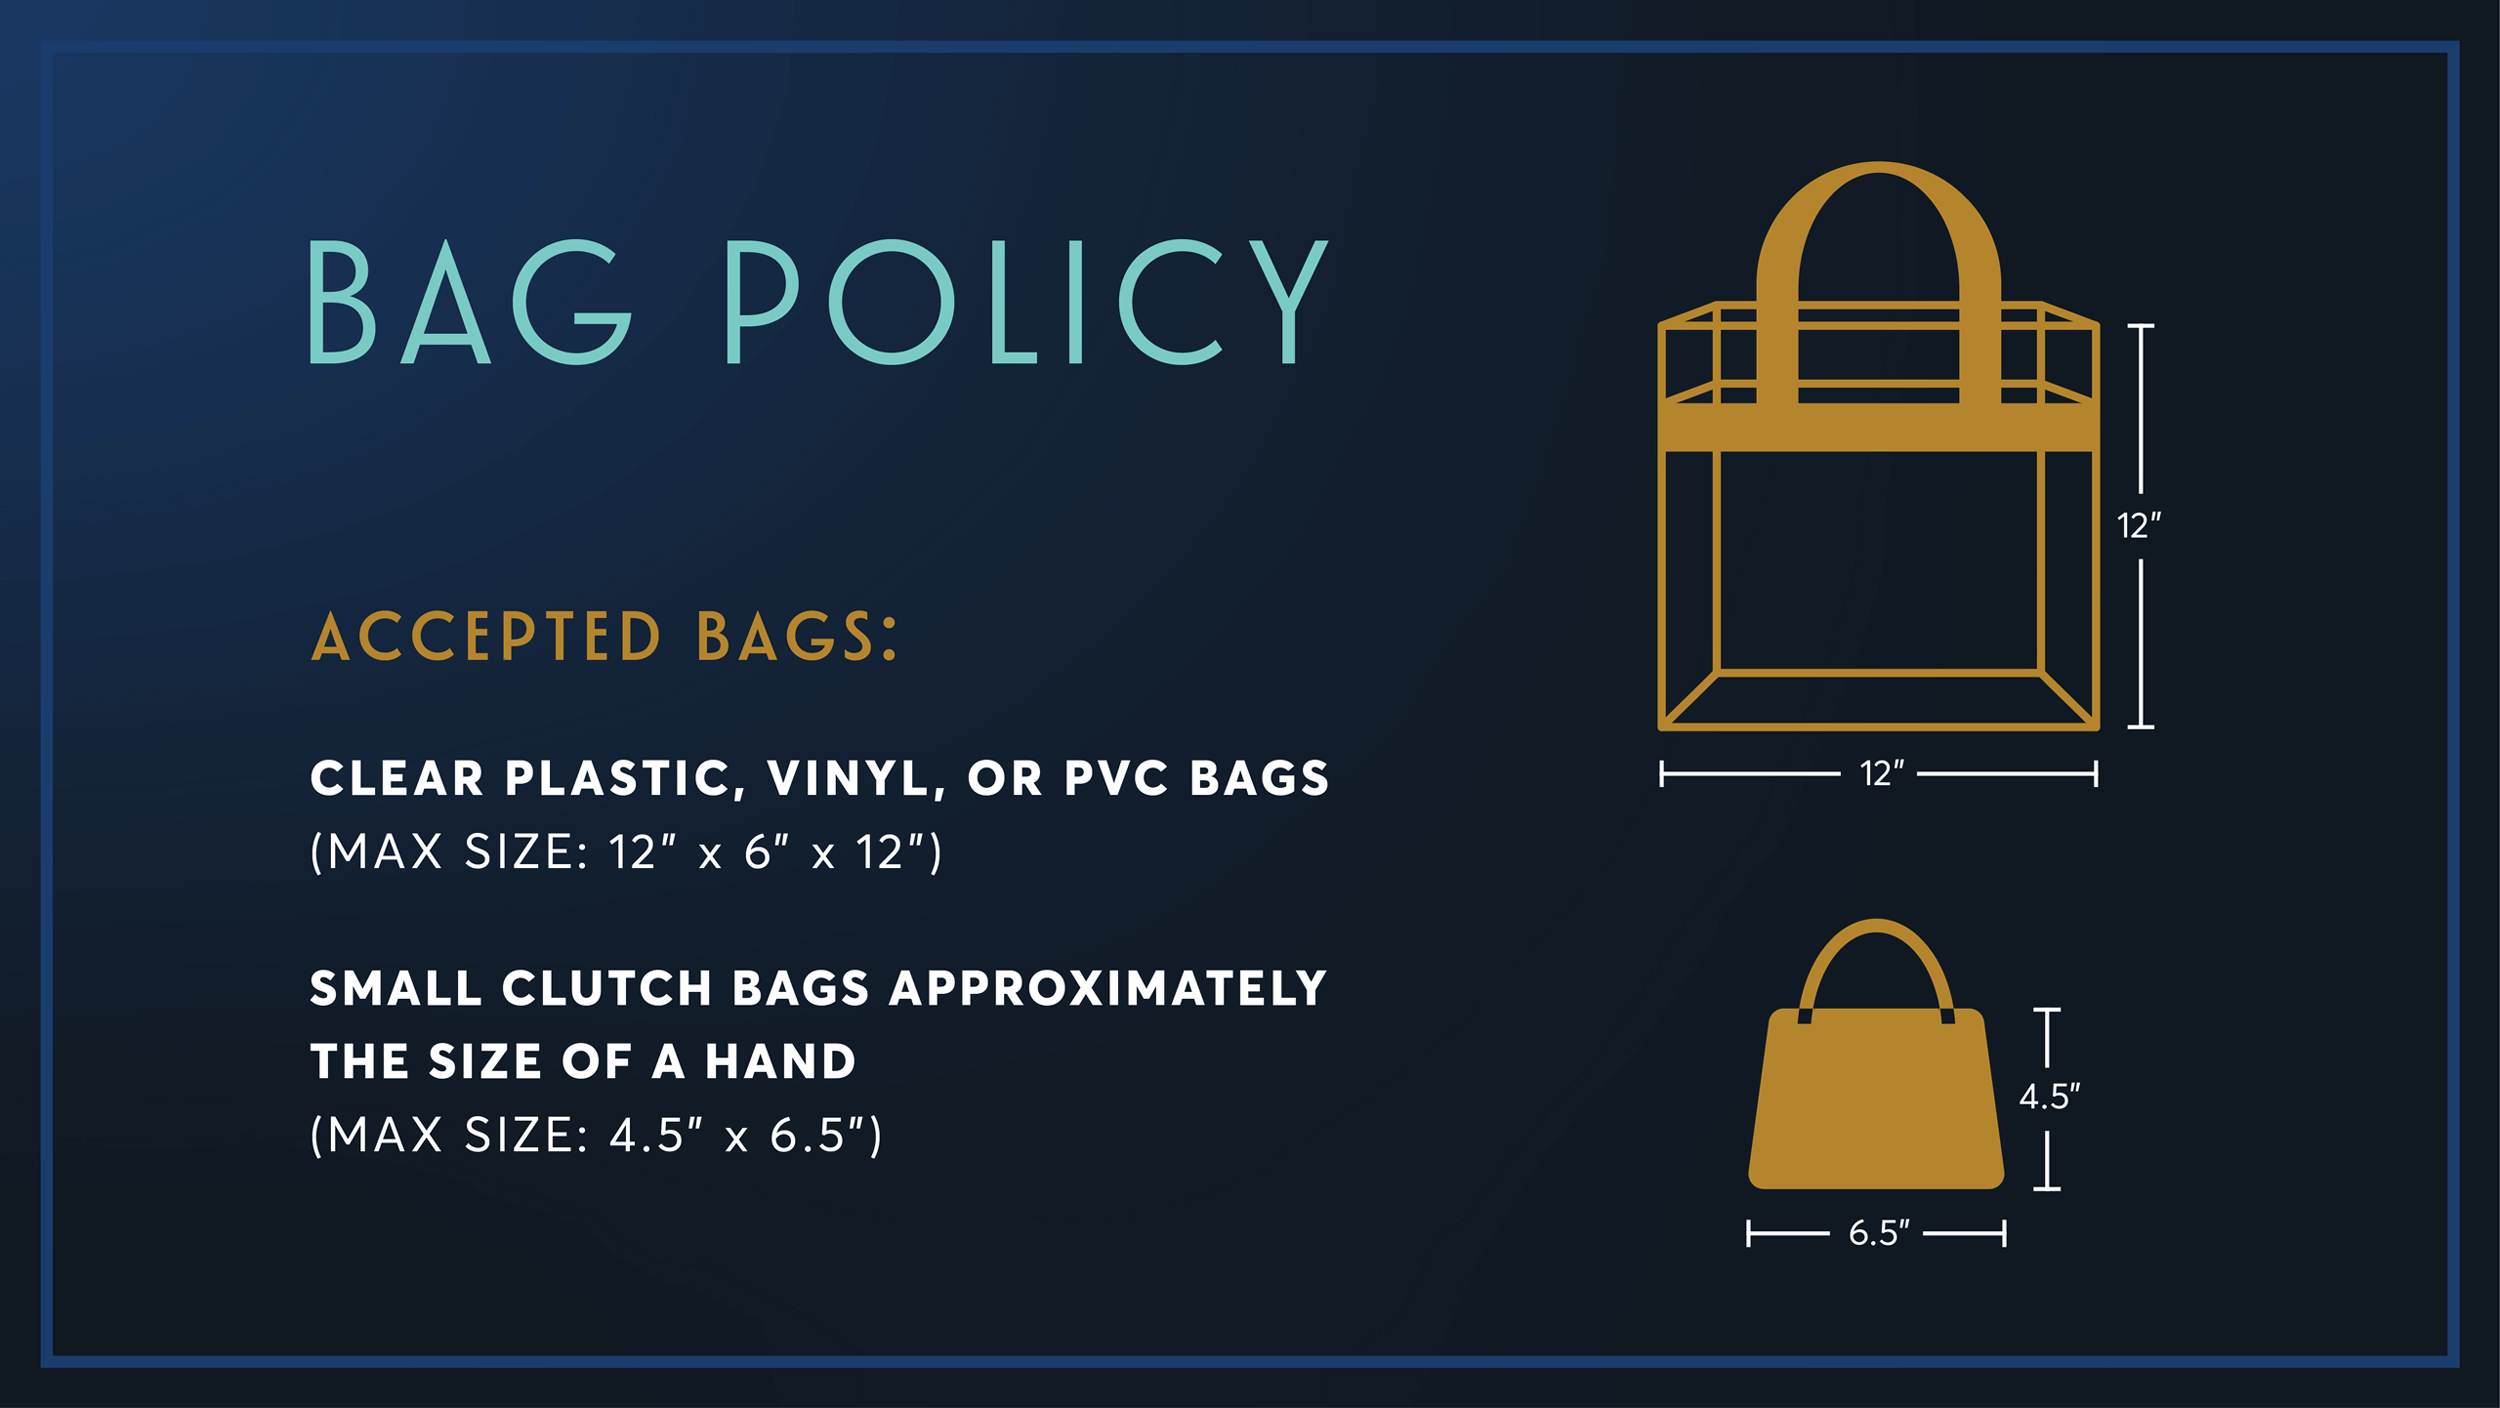 popup: Bag Policy: accepted bags: clear plastic, vinyl, or pvc bags (max size: 12 inches x 6 inches x 12 inches; small clutch bags approximately the size of a hand (max size: 4.5 inches x 6.5 inches).